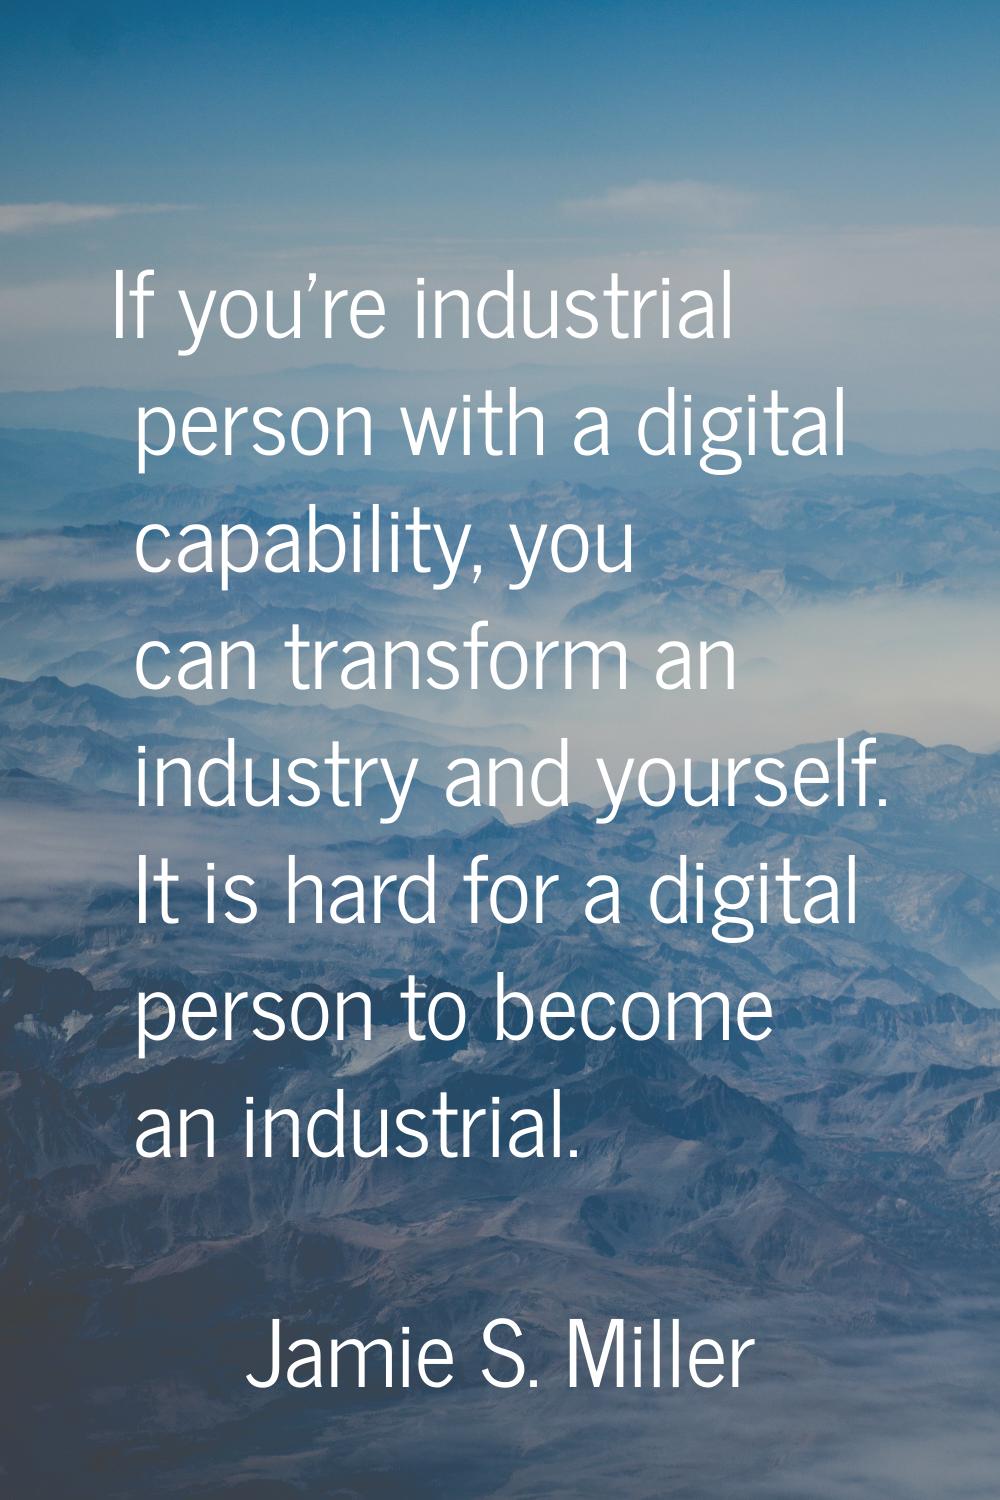 If you're industrial person with a digital capability, you can transform an industry and yourself. 